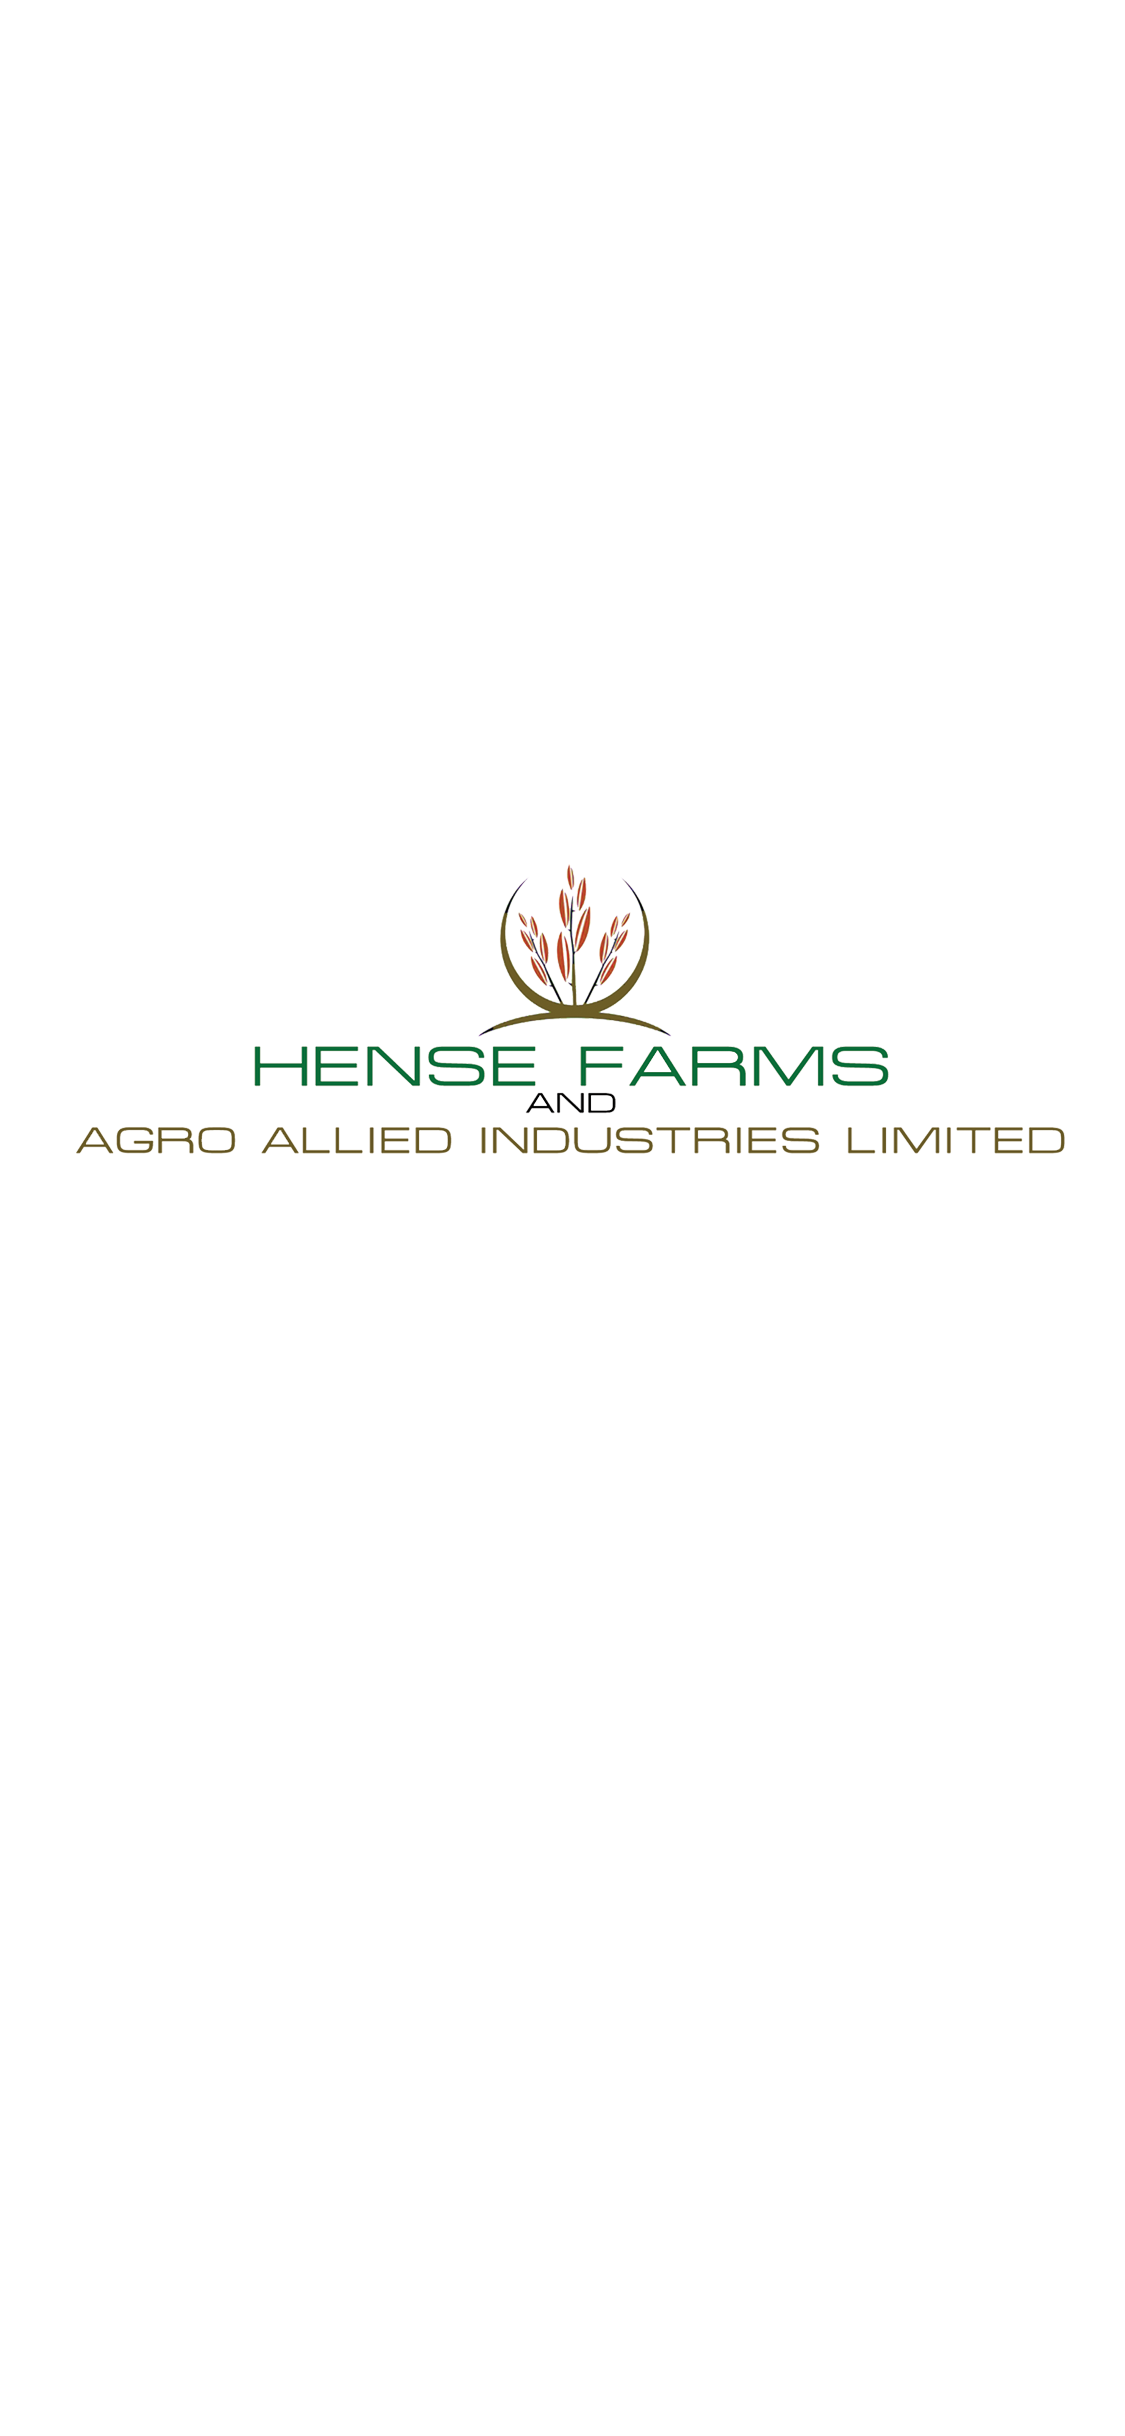 Hense farms and Agro Allied Industries Limited